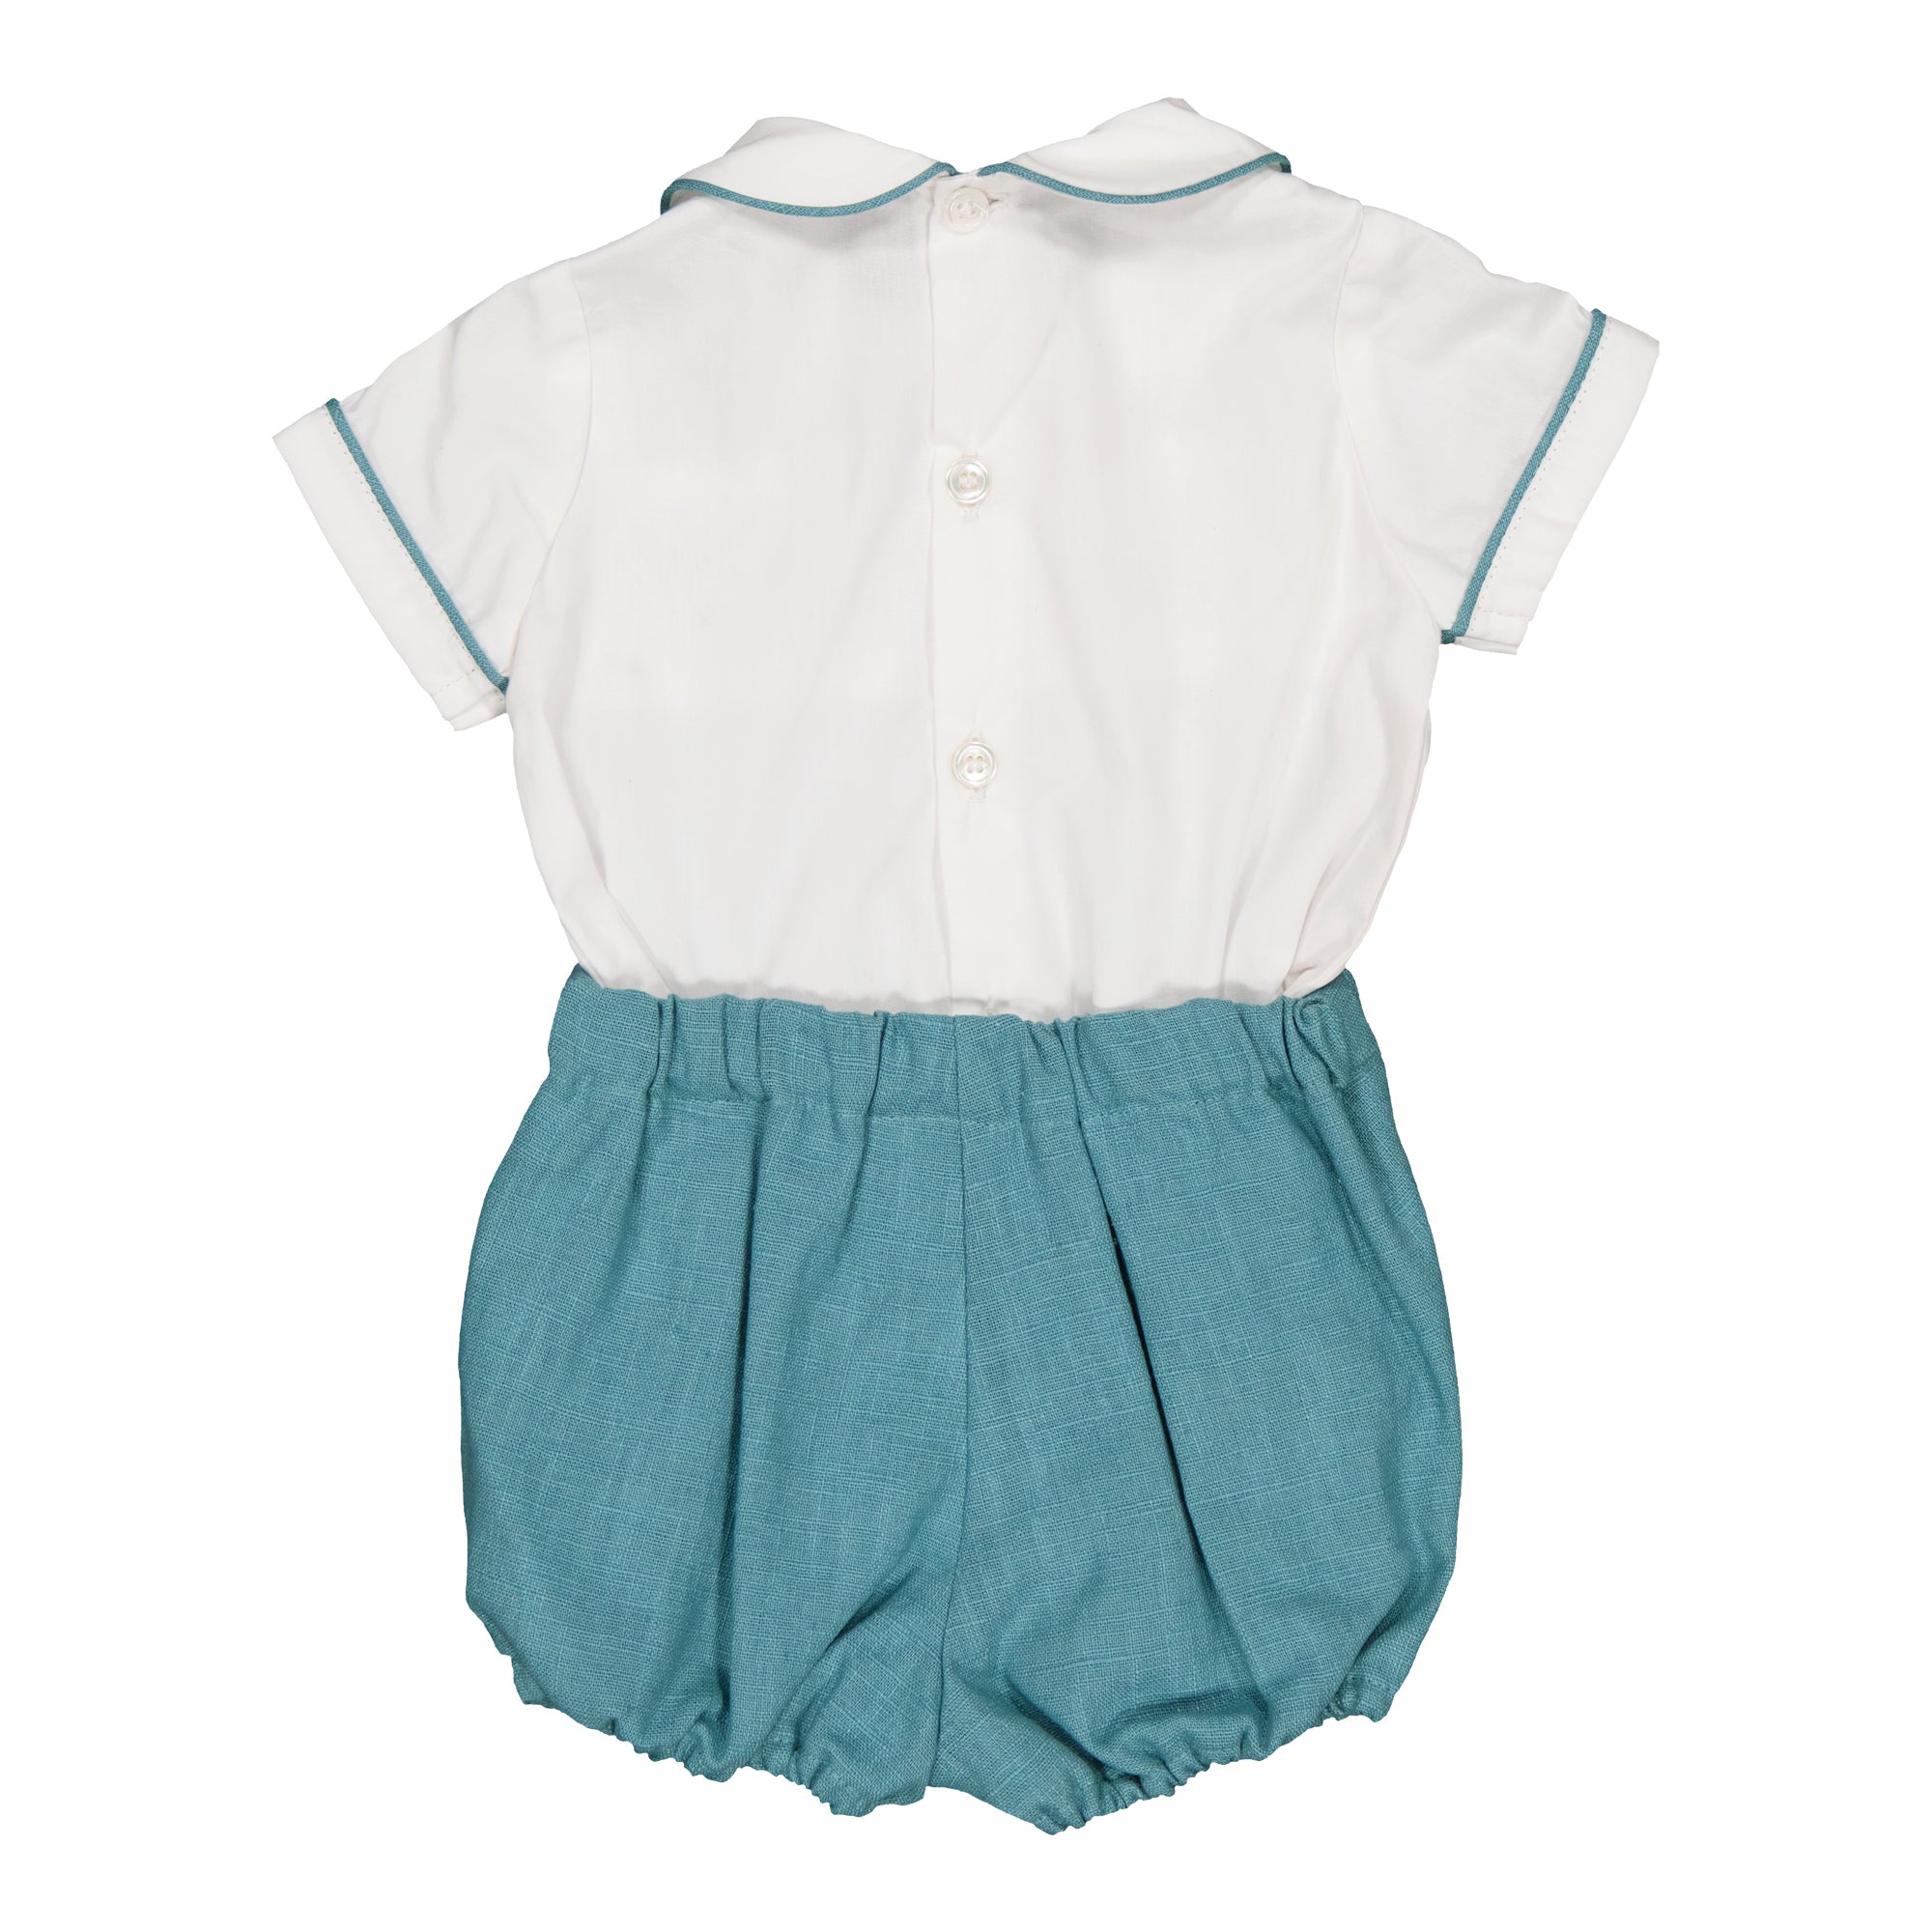 Smock Outfit Barnabe